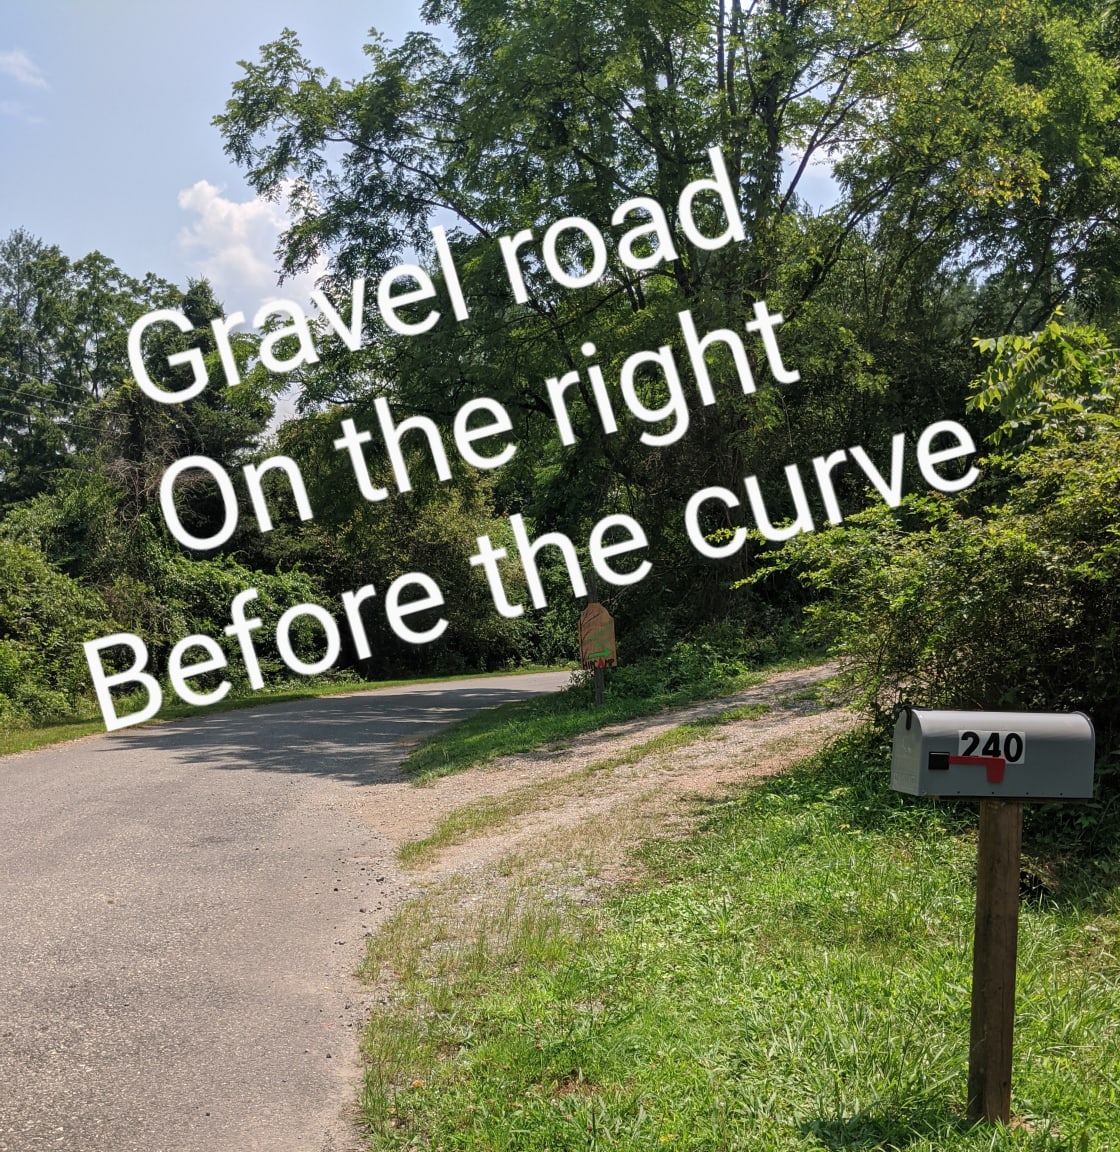 Be sure to follow these driving directions closely, (NOT gps). If you want to Google a driveway try 240 Paul Cooper Rd. But I DO NOT own that trailer. So stay on the gravel road that veers left. Stay on gravel drive. Park in the gravel (yet grassy lol) lot, and then walk around to choose your spot.